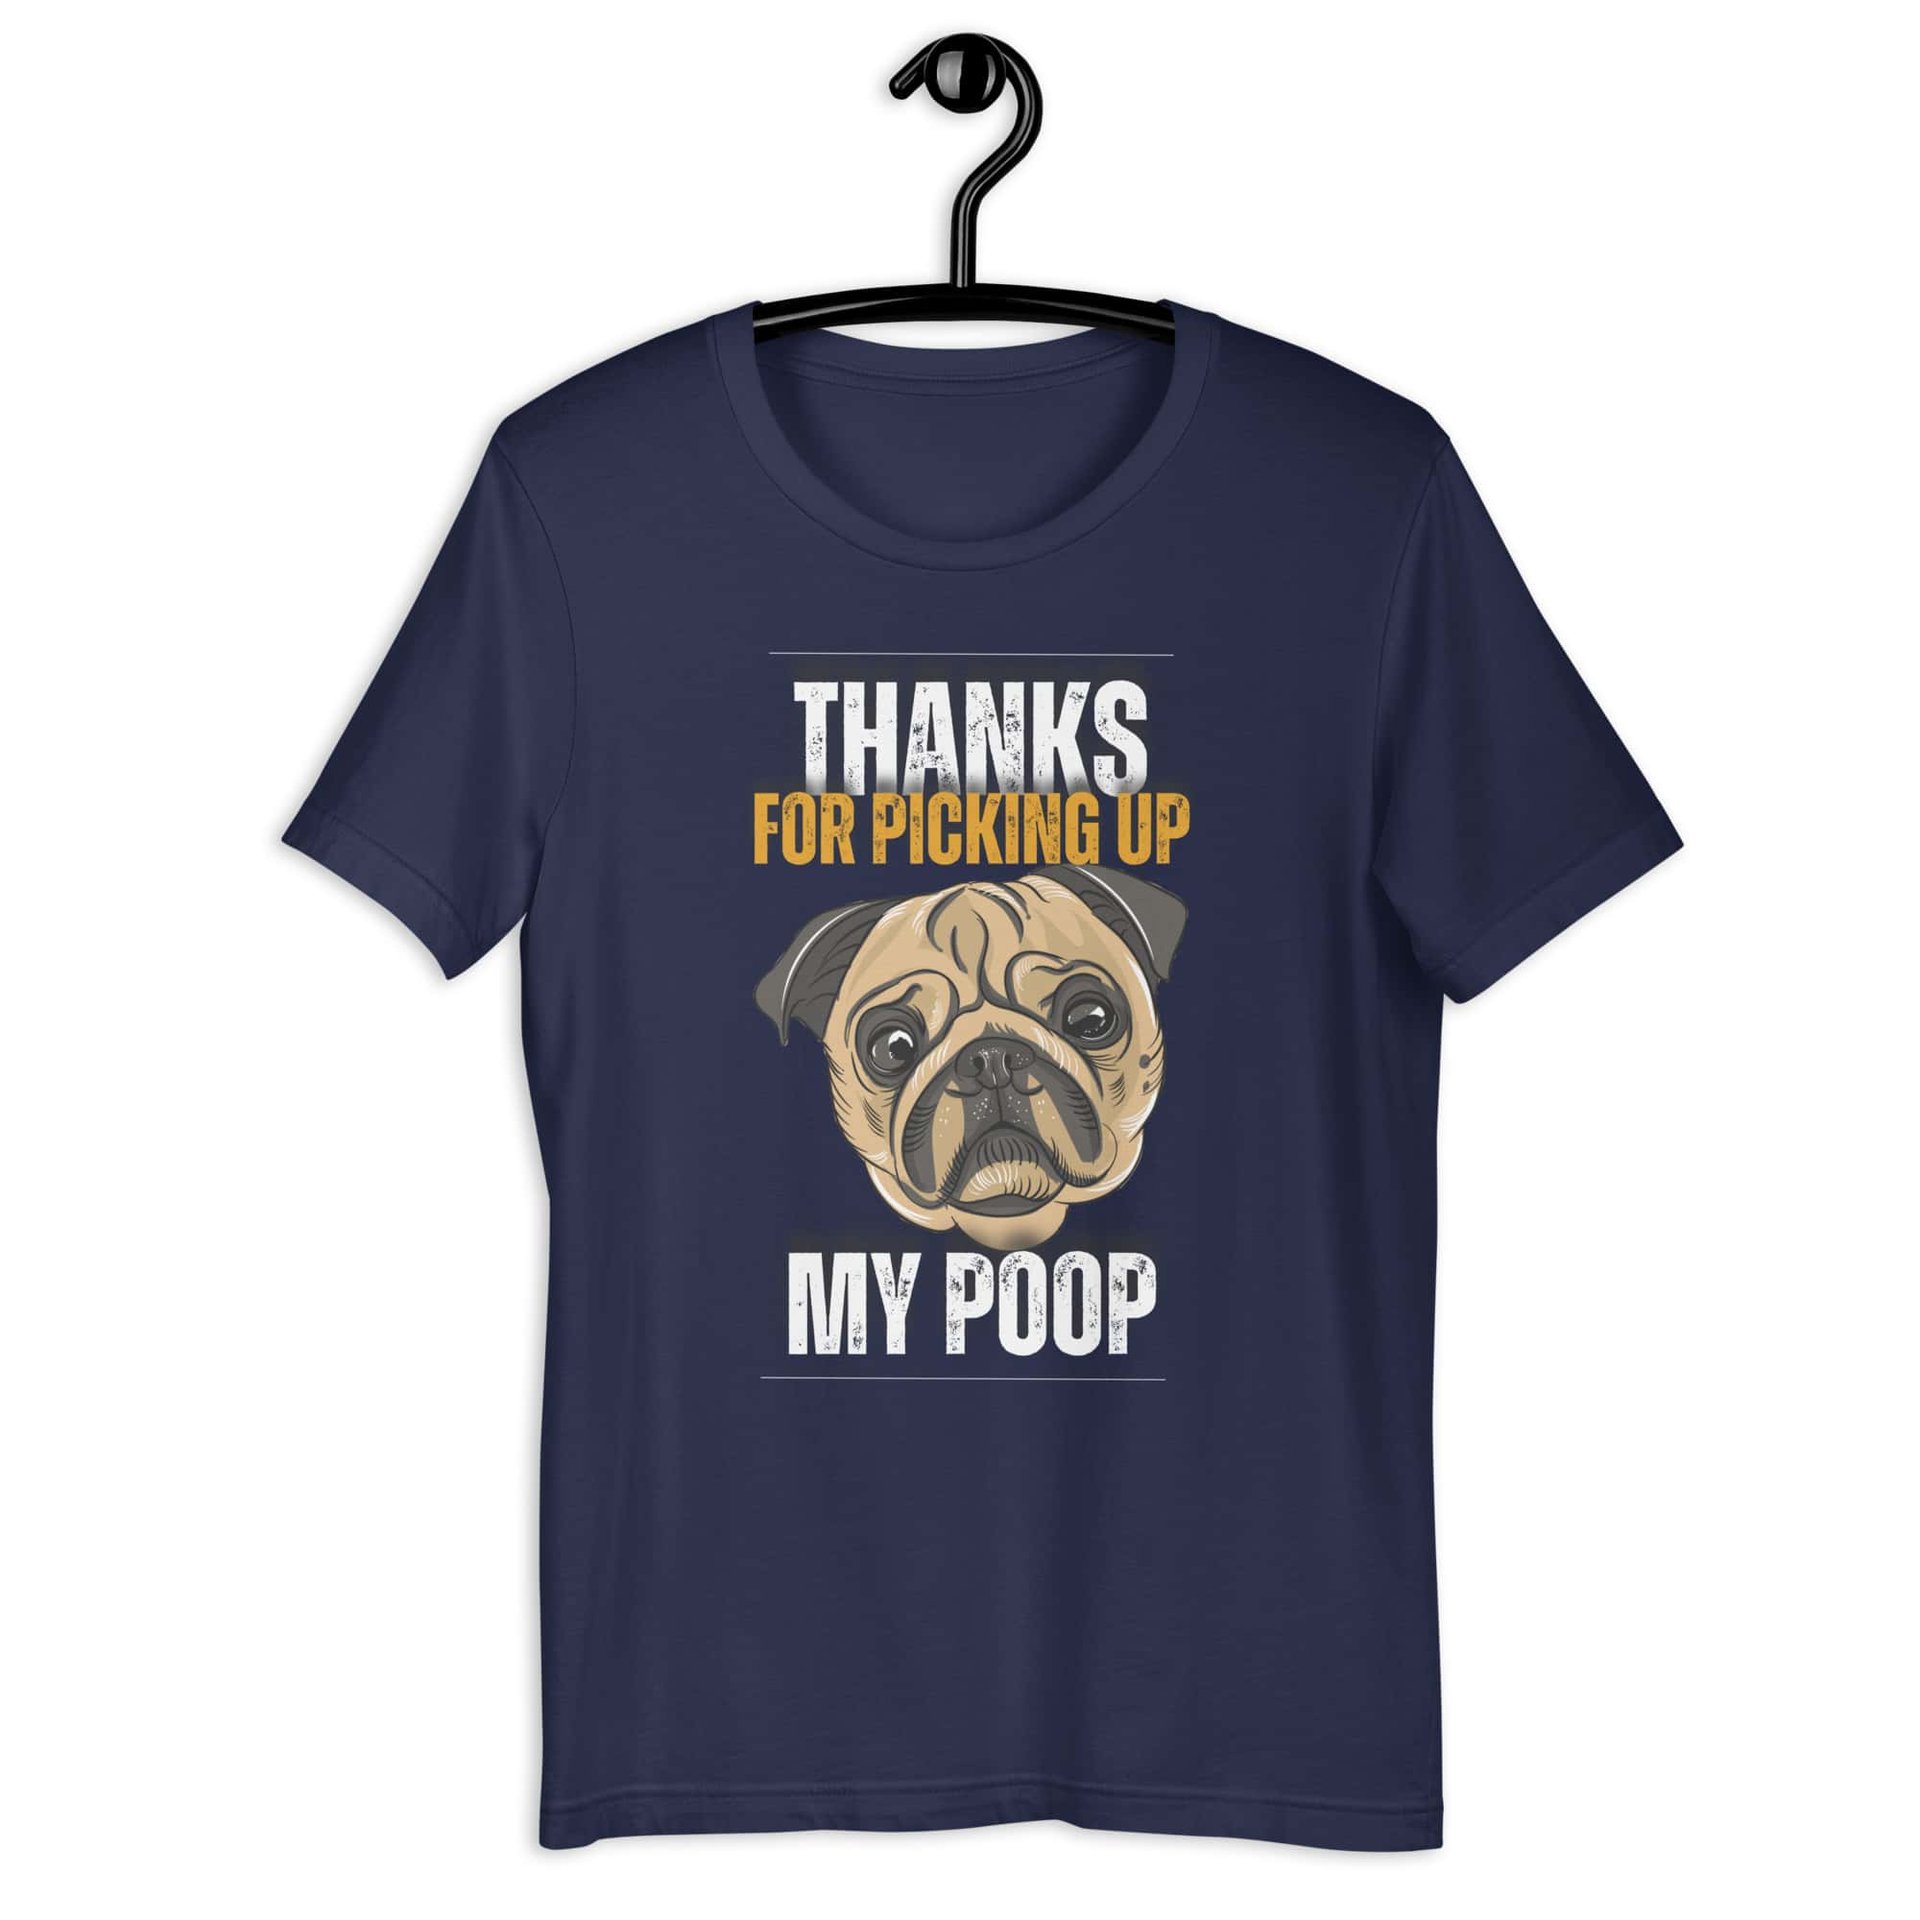 Thanks For Picking Up My POOP Funny Bulldog Unisex T-Shir. Navy